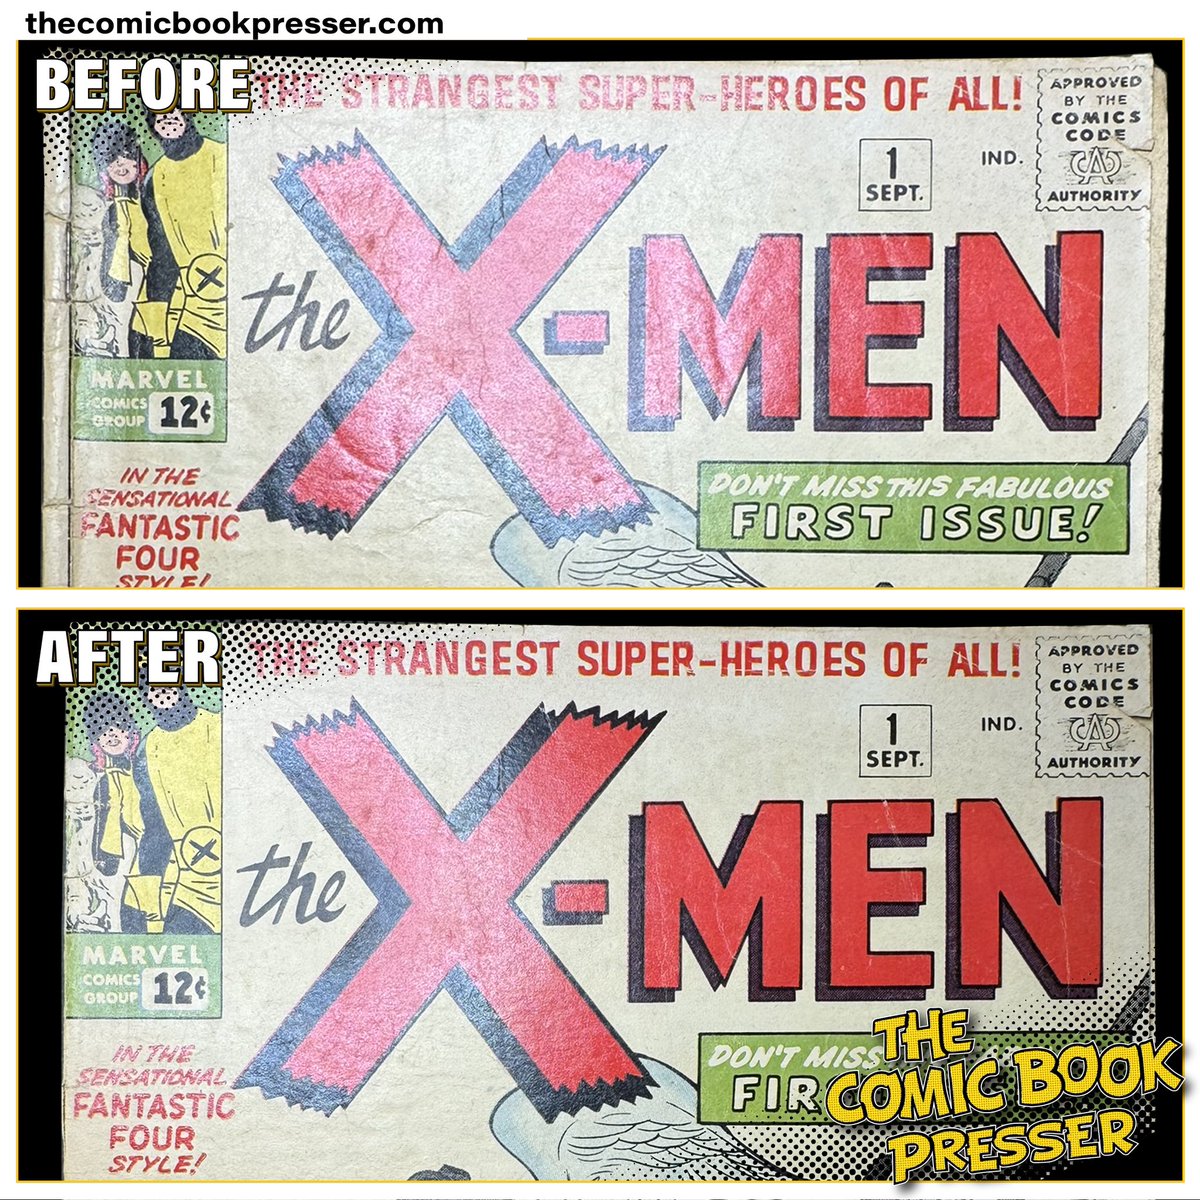 Here’s what we can do for you:
Expert Cleaning and Pressing: Breathe new life into your cherished comics that have major or minor damage.

#thecomicbookpresser #comicpressing #comicbookpressing #xmen #comics #marvelcomics #comicbook